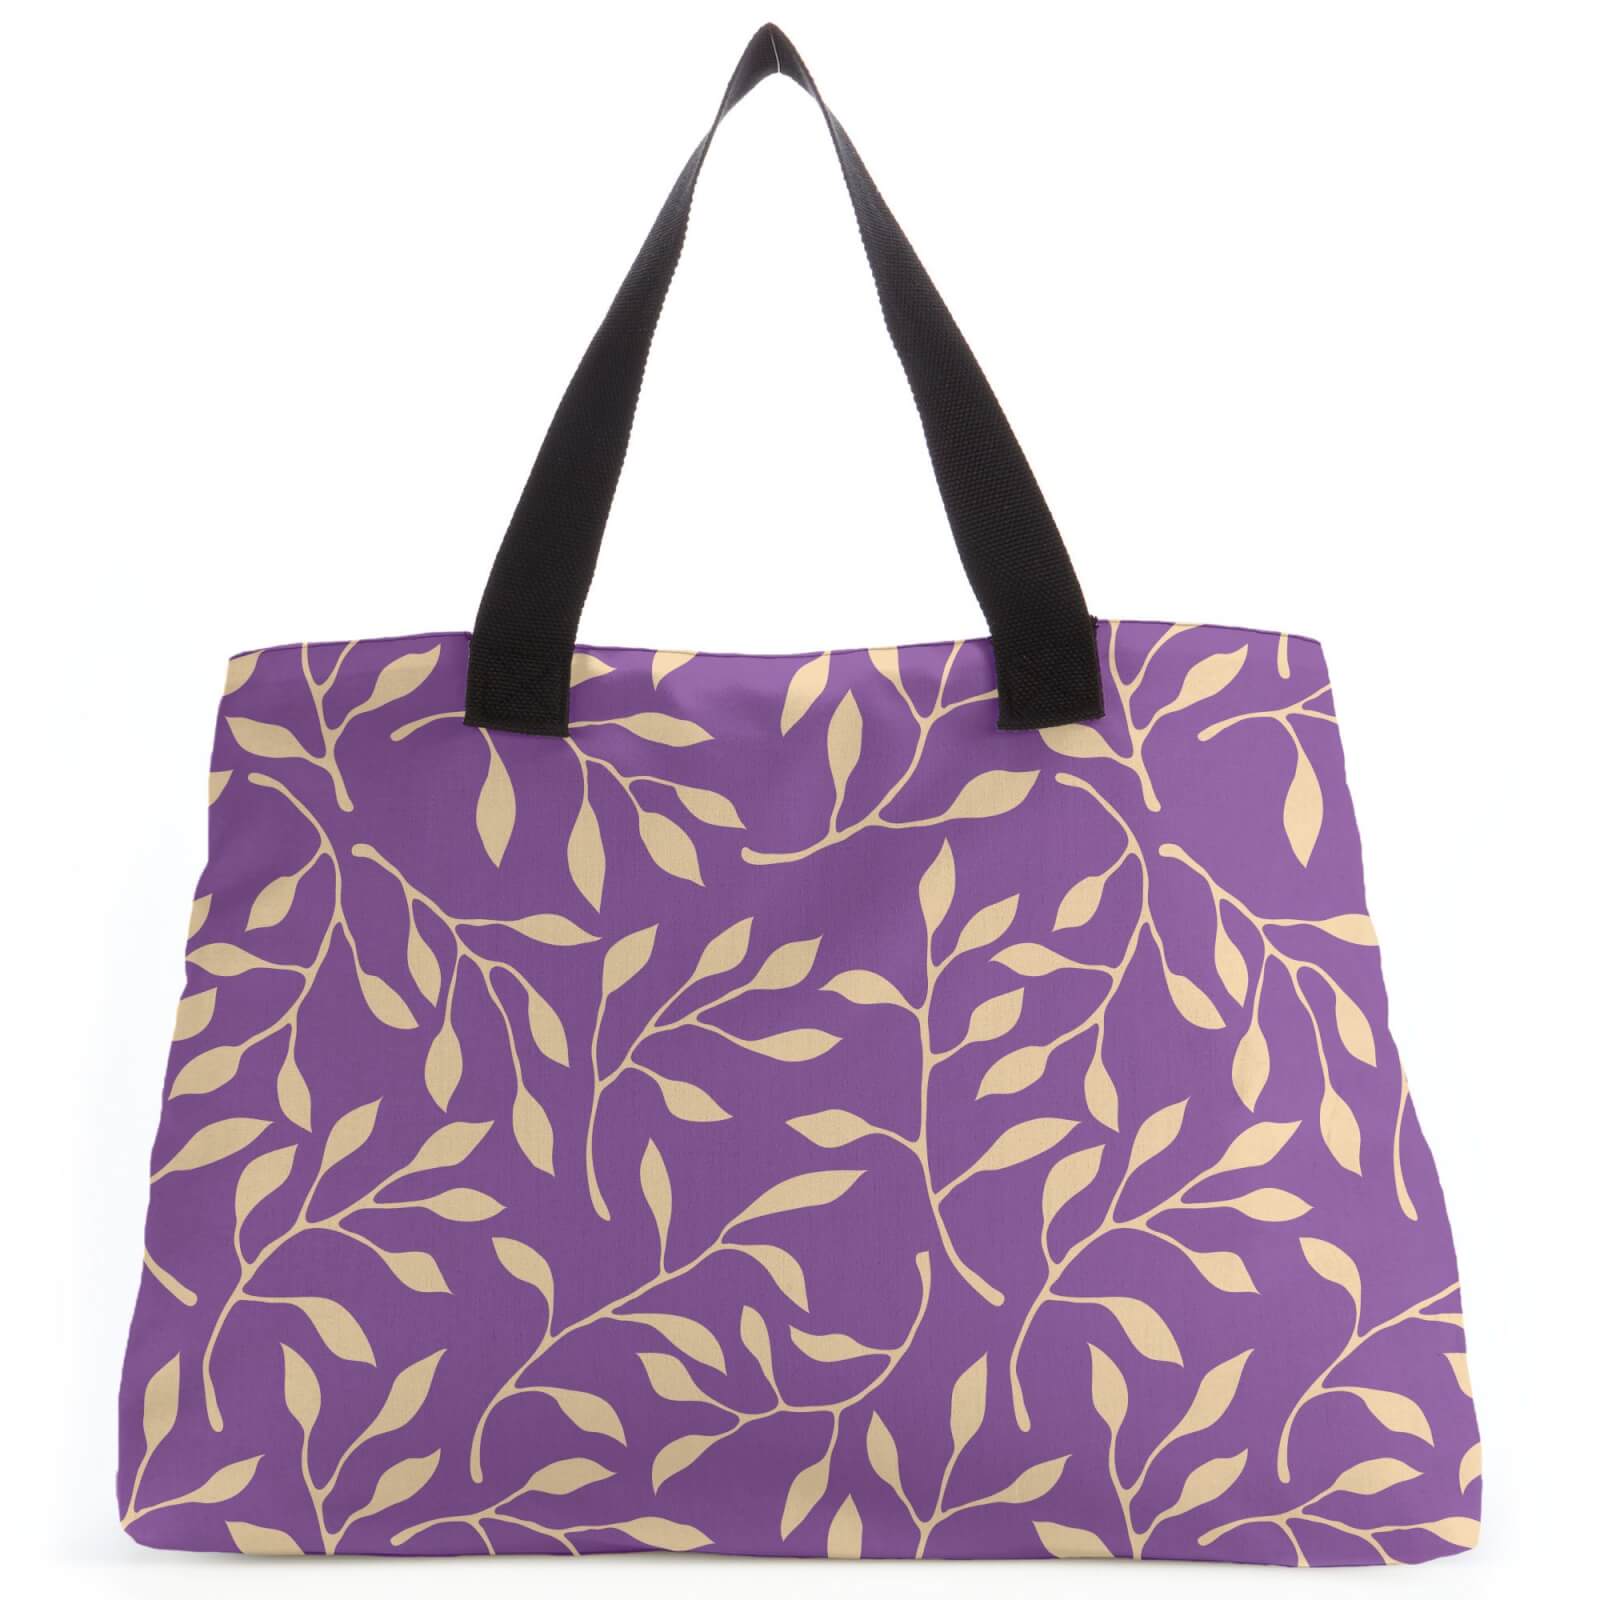 Scattered Branches Tote Bag